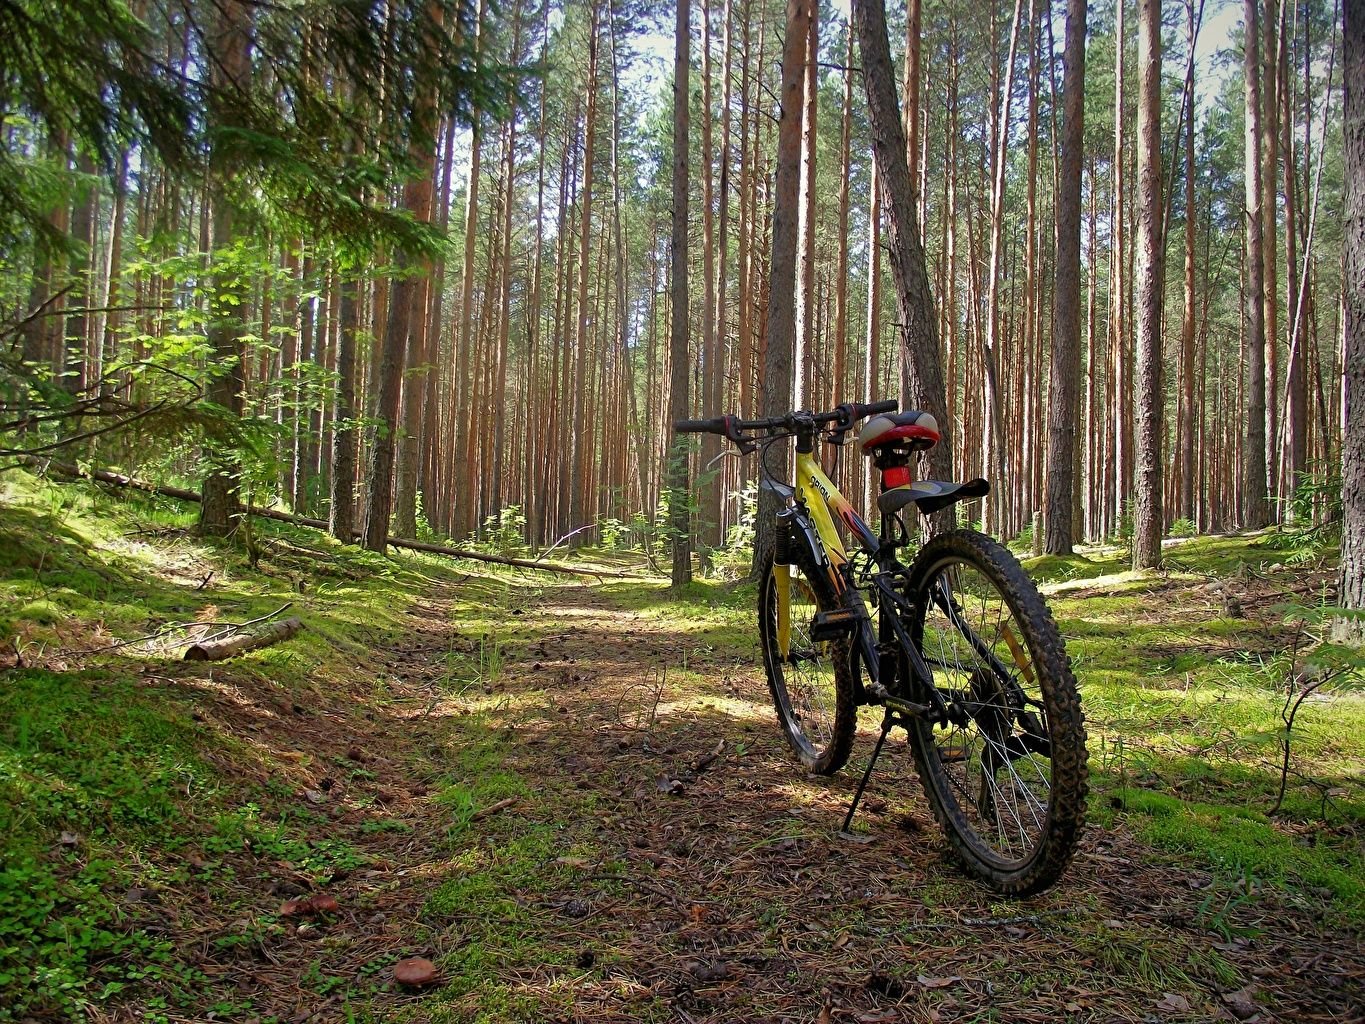 Desktop Wallpaper Bicycle Nature forest1zoom.me